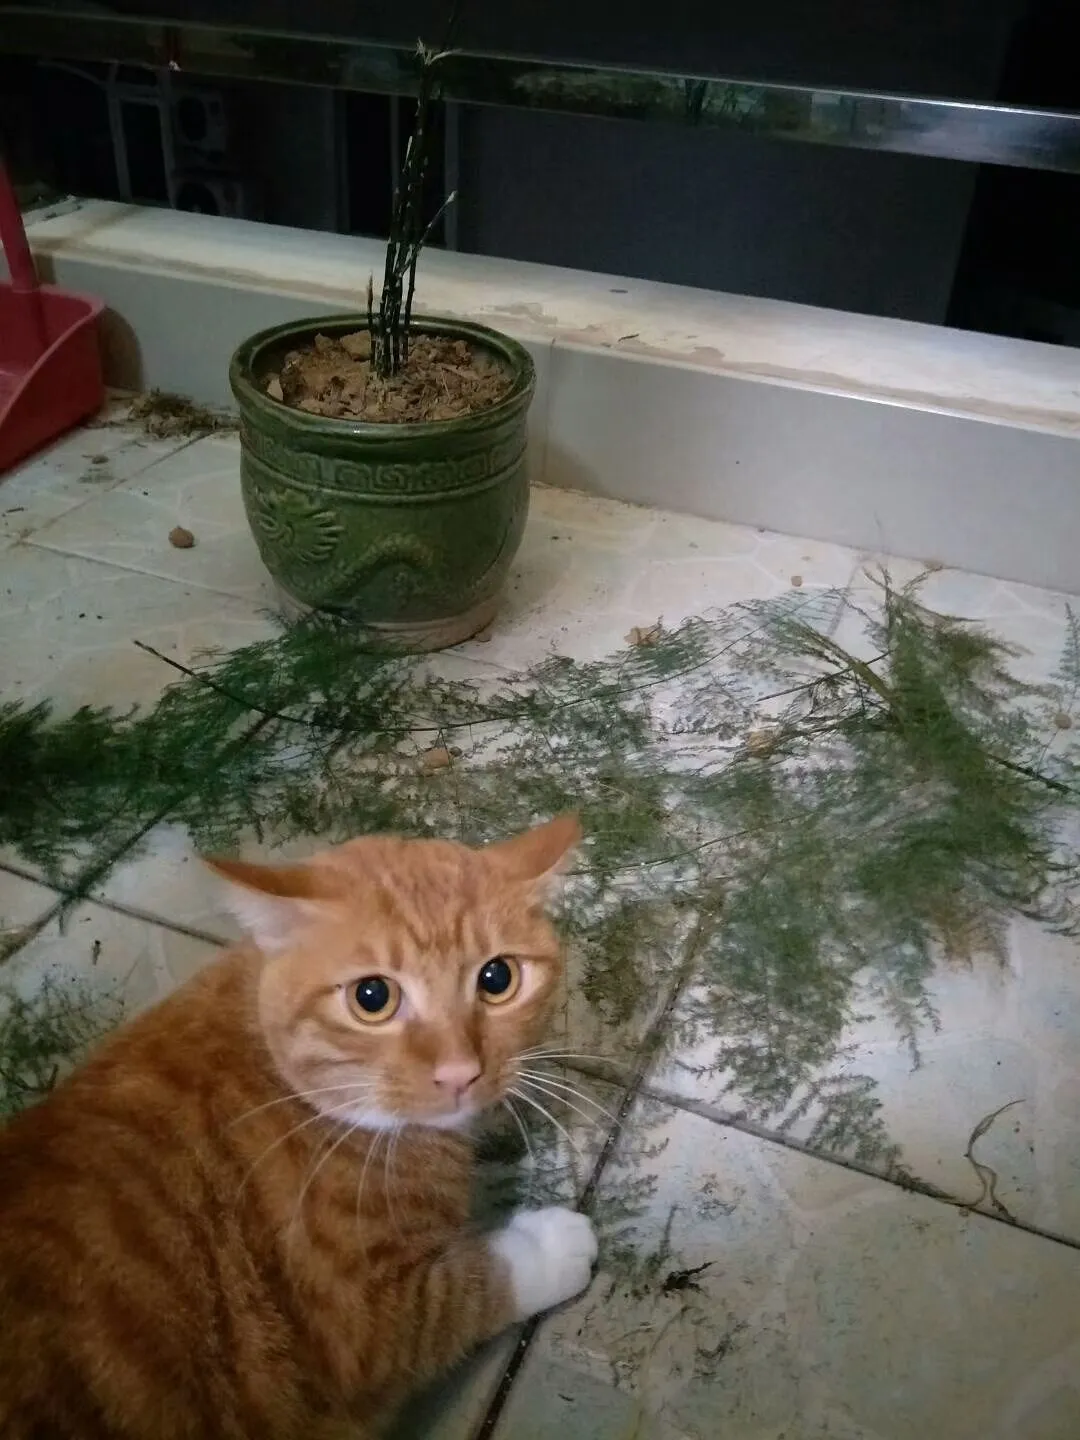 Is an Asparagus Fern Poisonous to Cats?